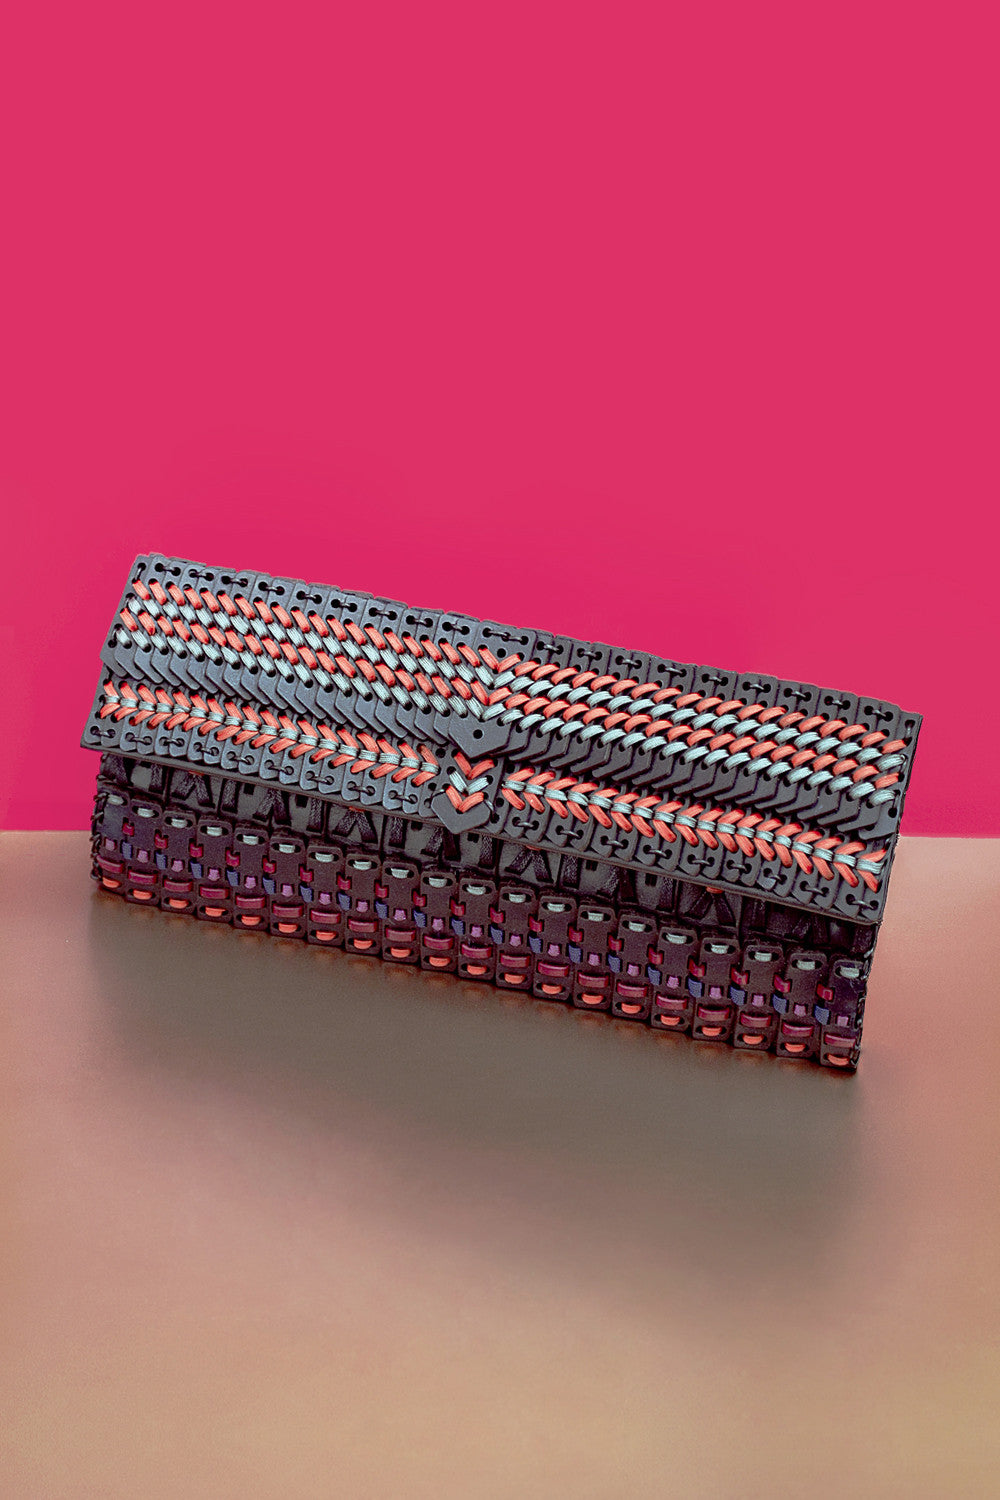 Woven Leather "ONNA" Clutch Bag